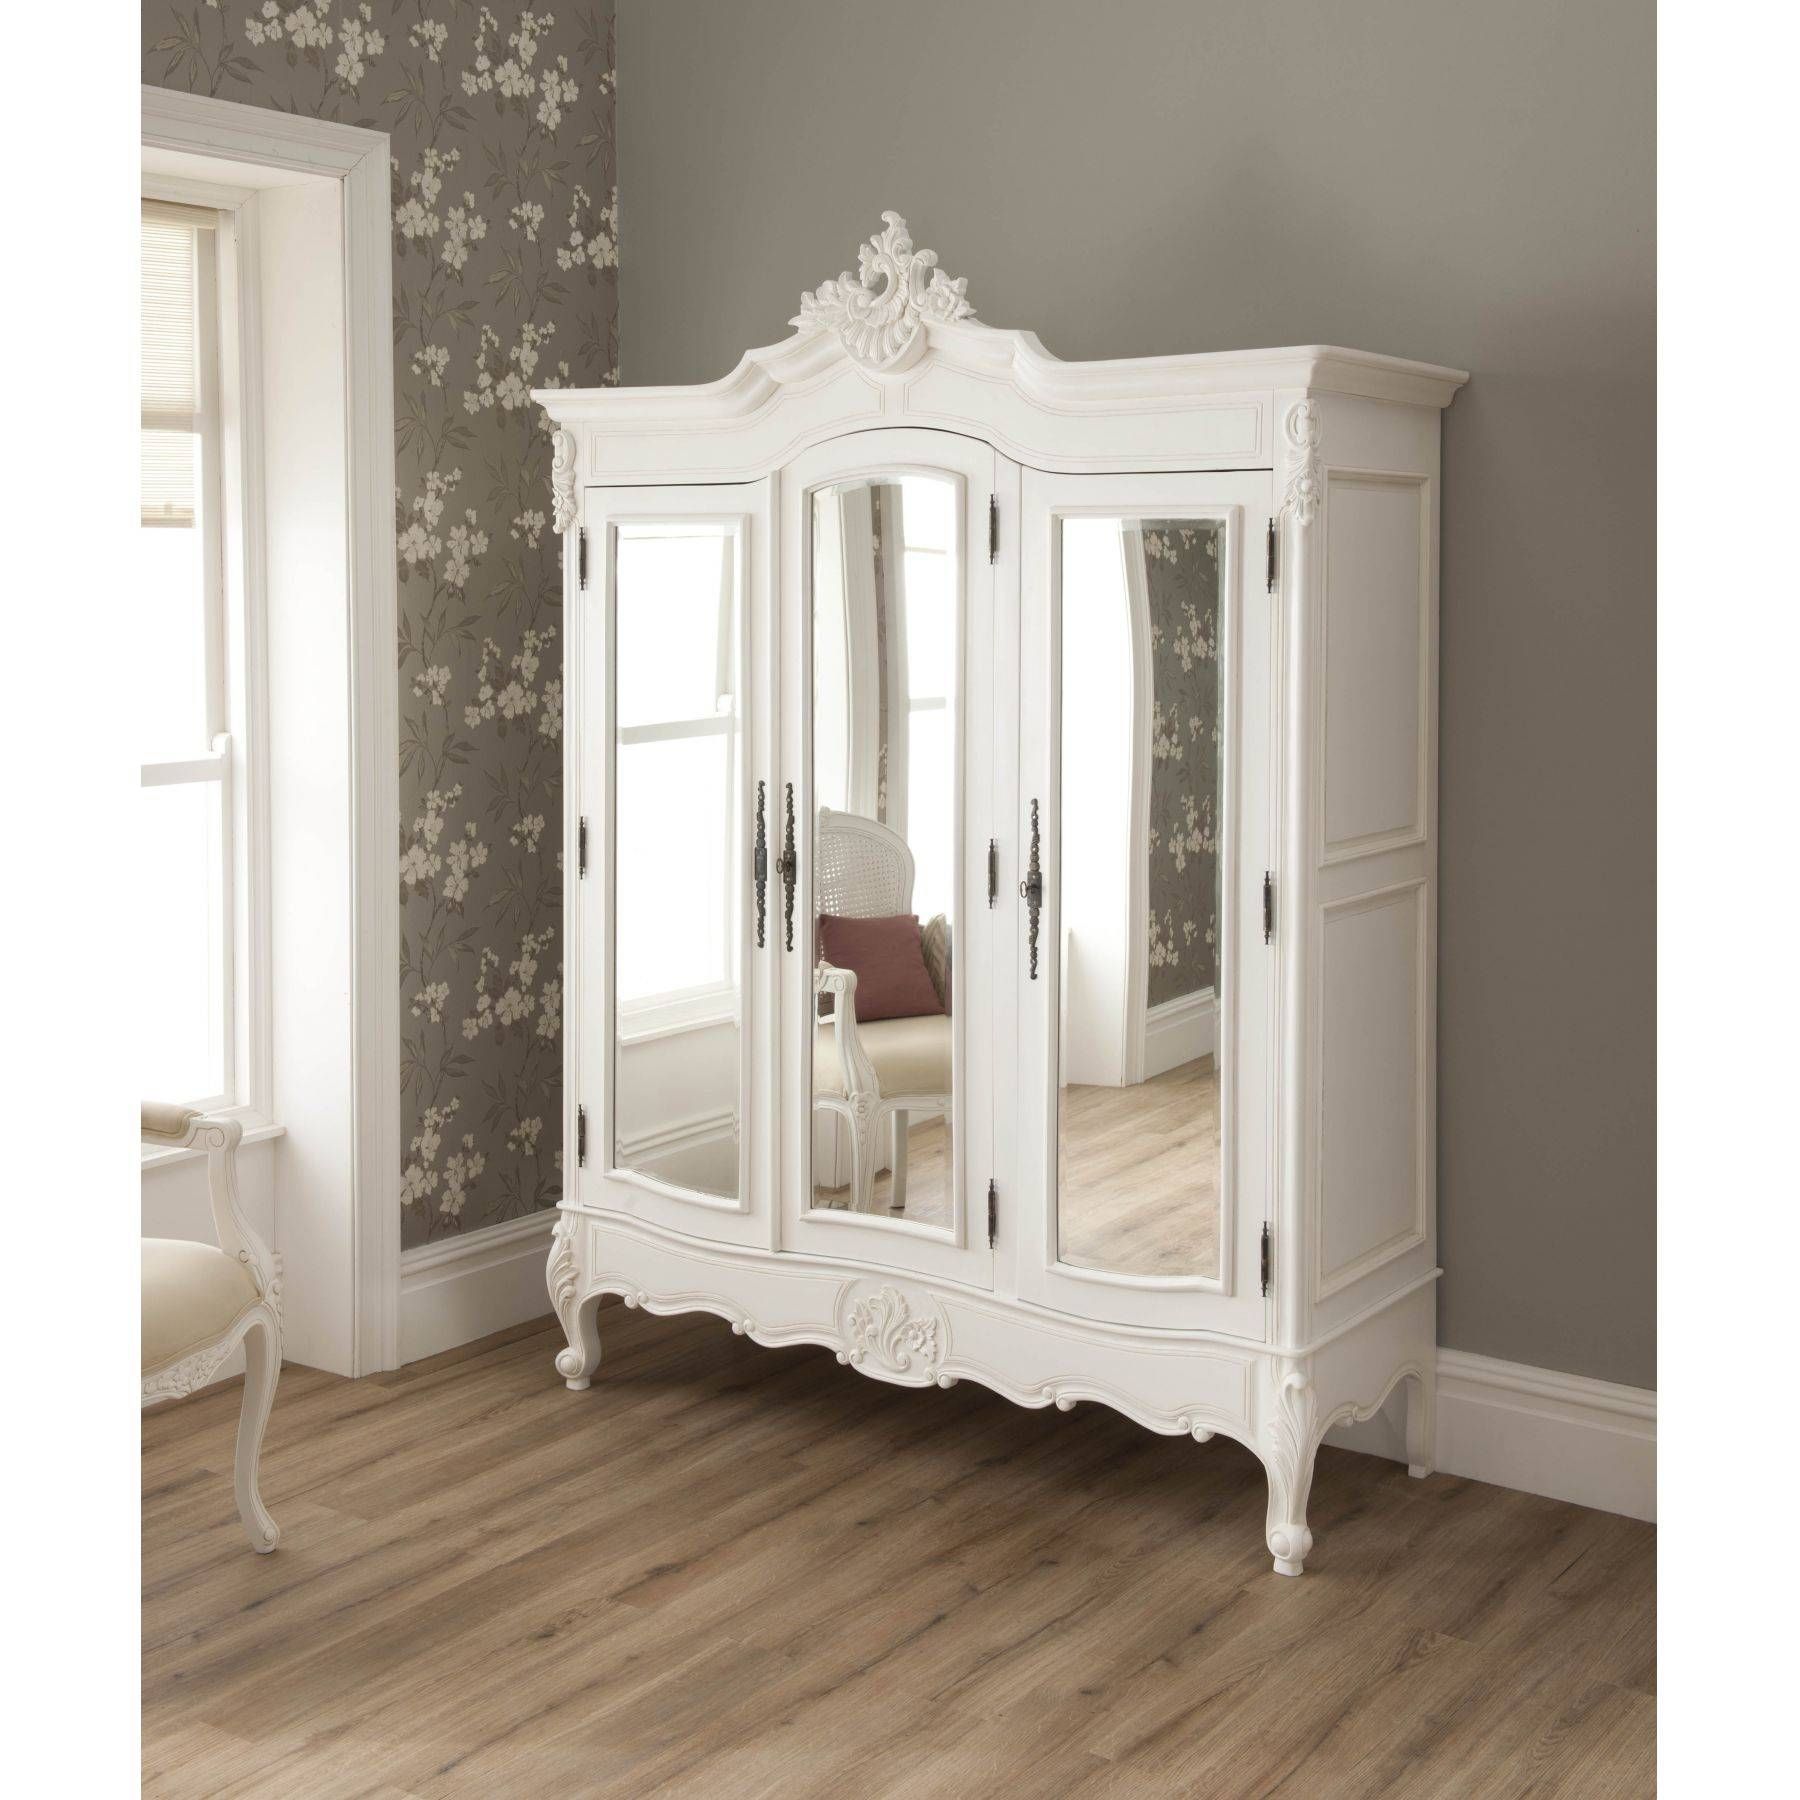 La Rochelle Shabby Chic Antique Style Wardrobe | Shabby Chic Furniture For White French Style Wardrobes (View 8 of 15)